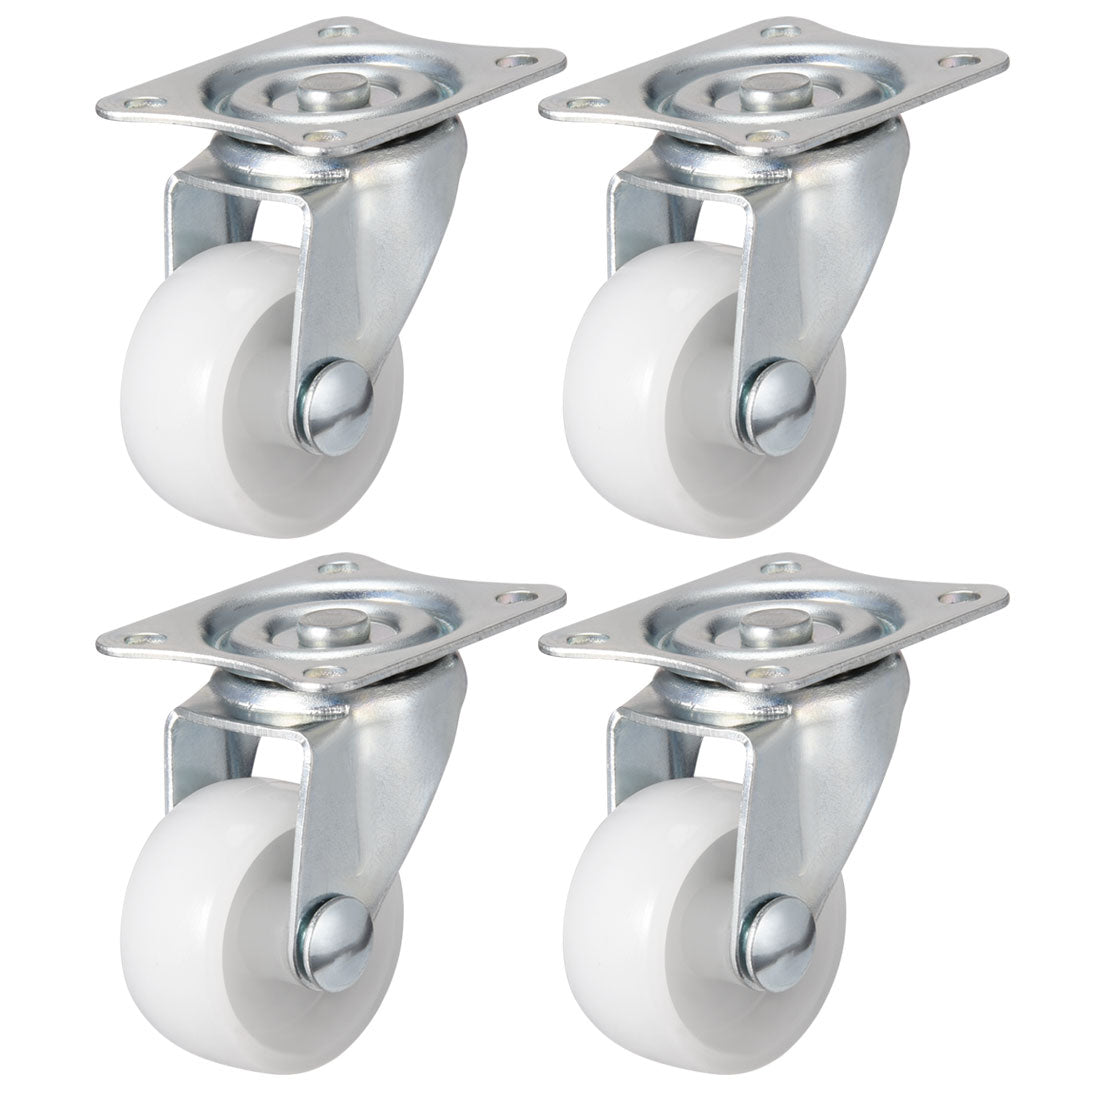 Uxcell Uxcell 2 Inch Swivel Caster Wheels PP 360 Degree Top Plate Mounted Caster Wheel 66lb Capacity 4 Pcs